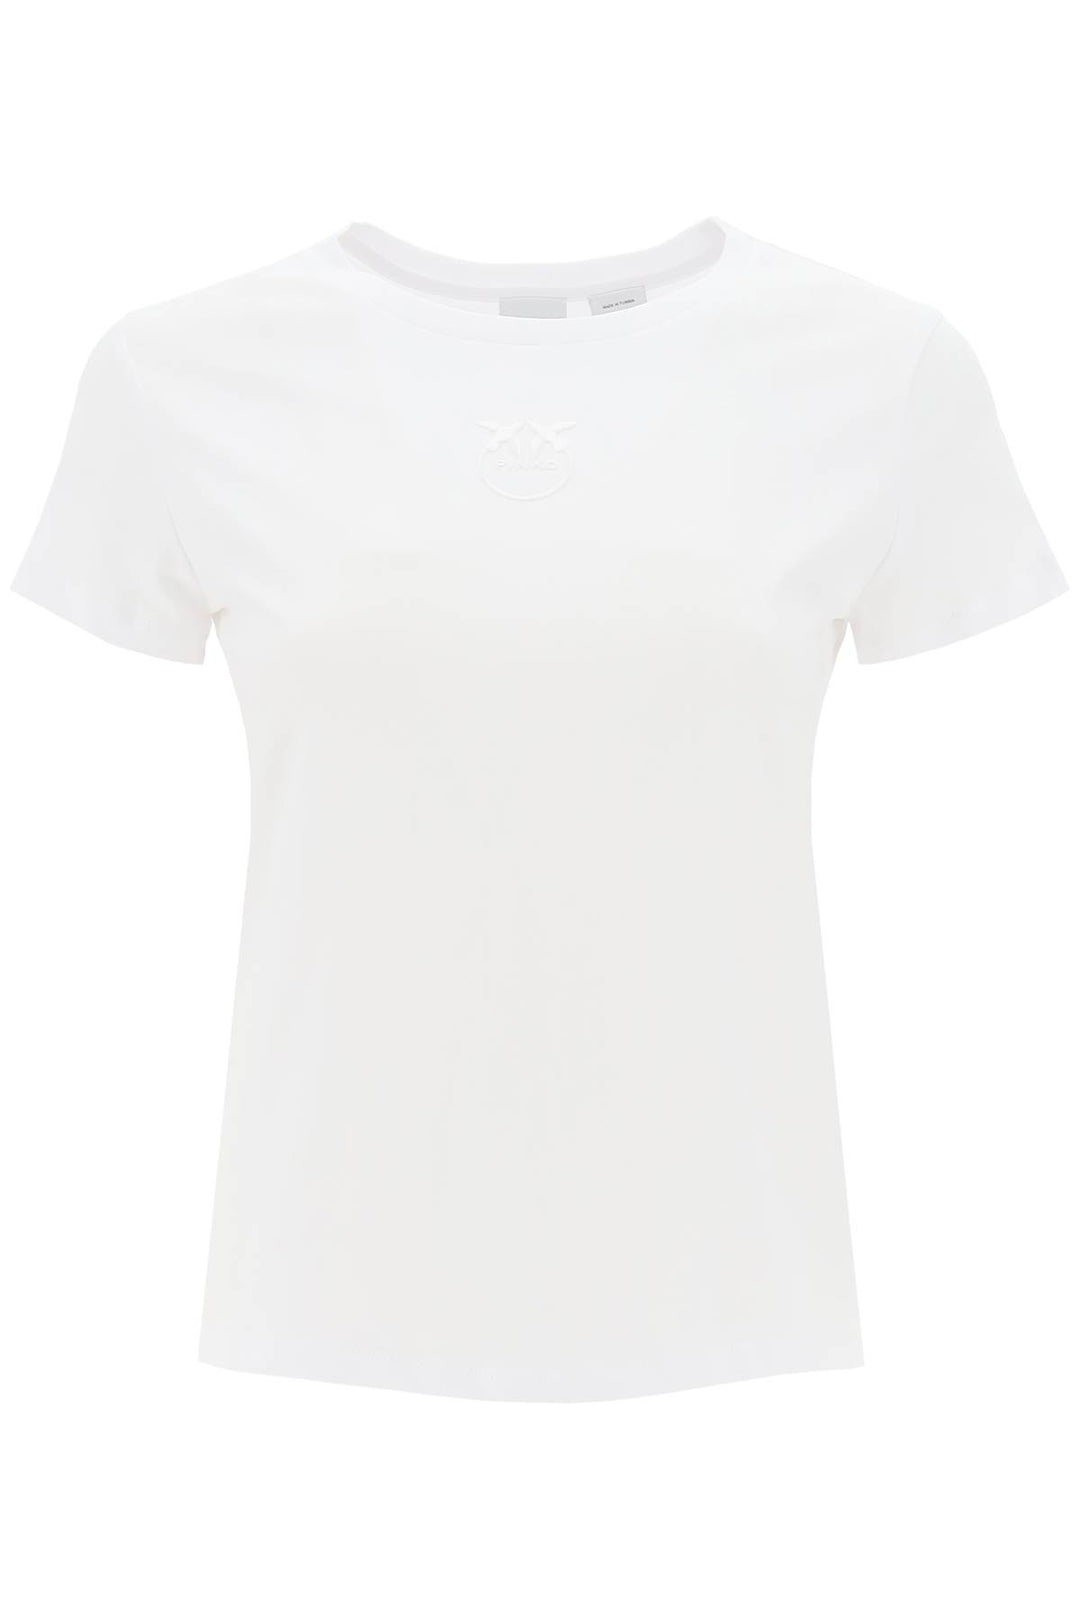 Pinko embroidered effect logo t-shirt-0